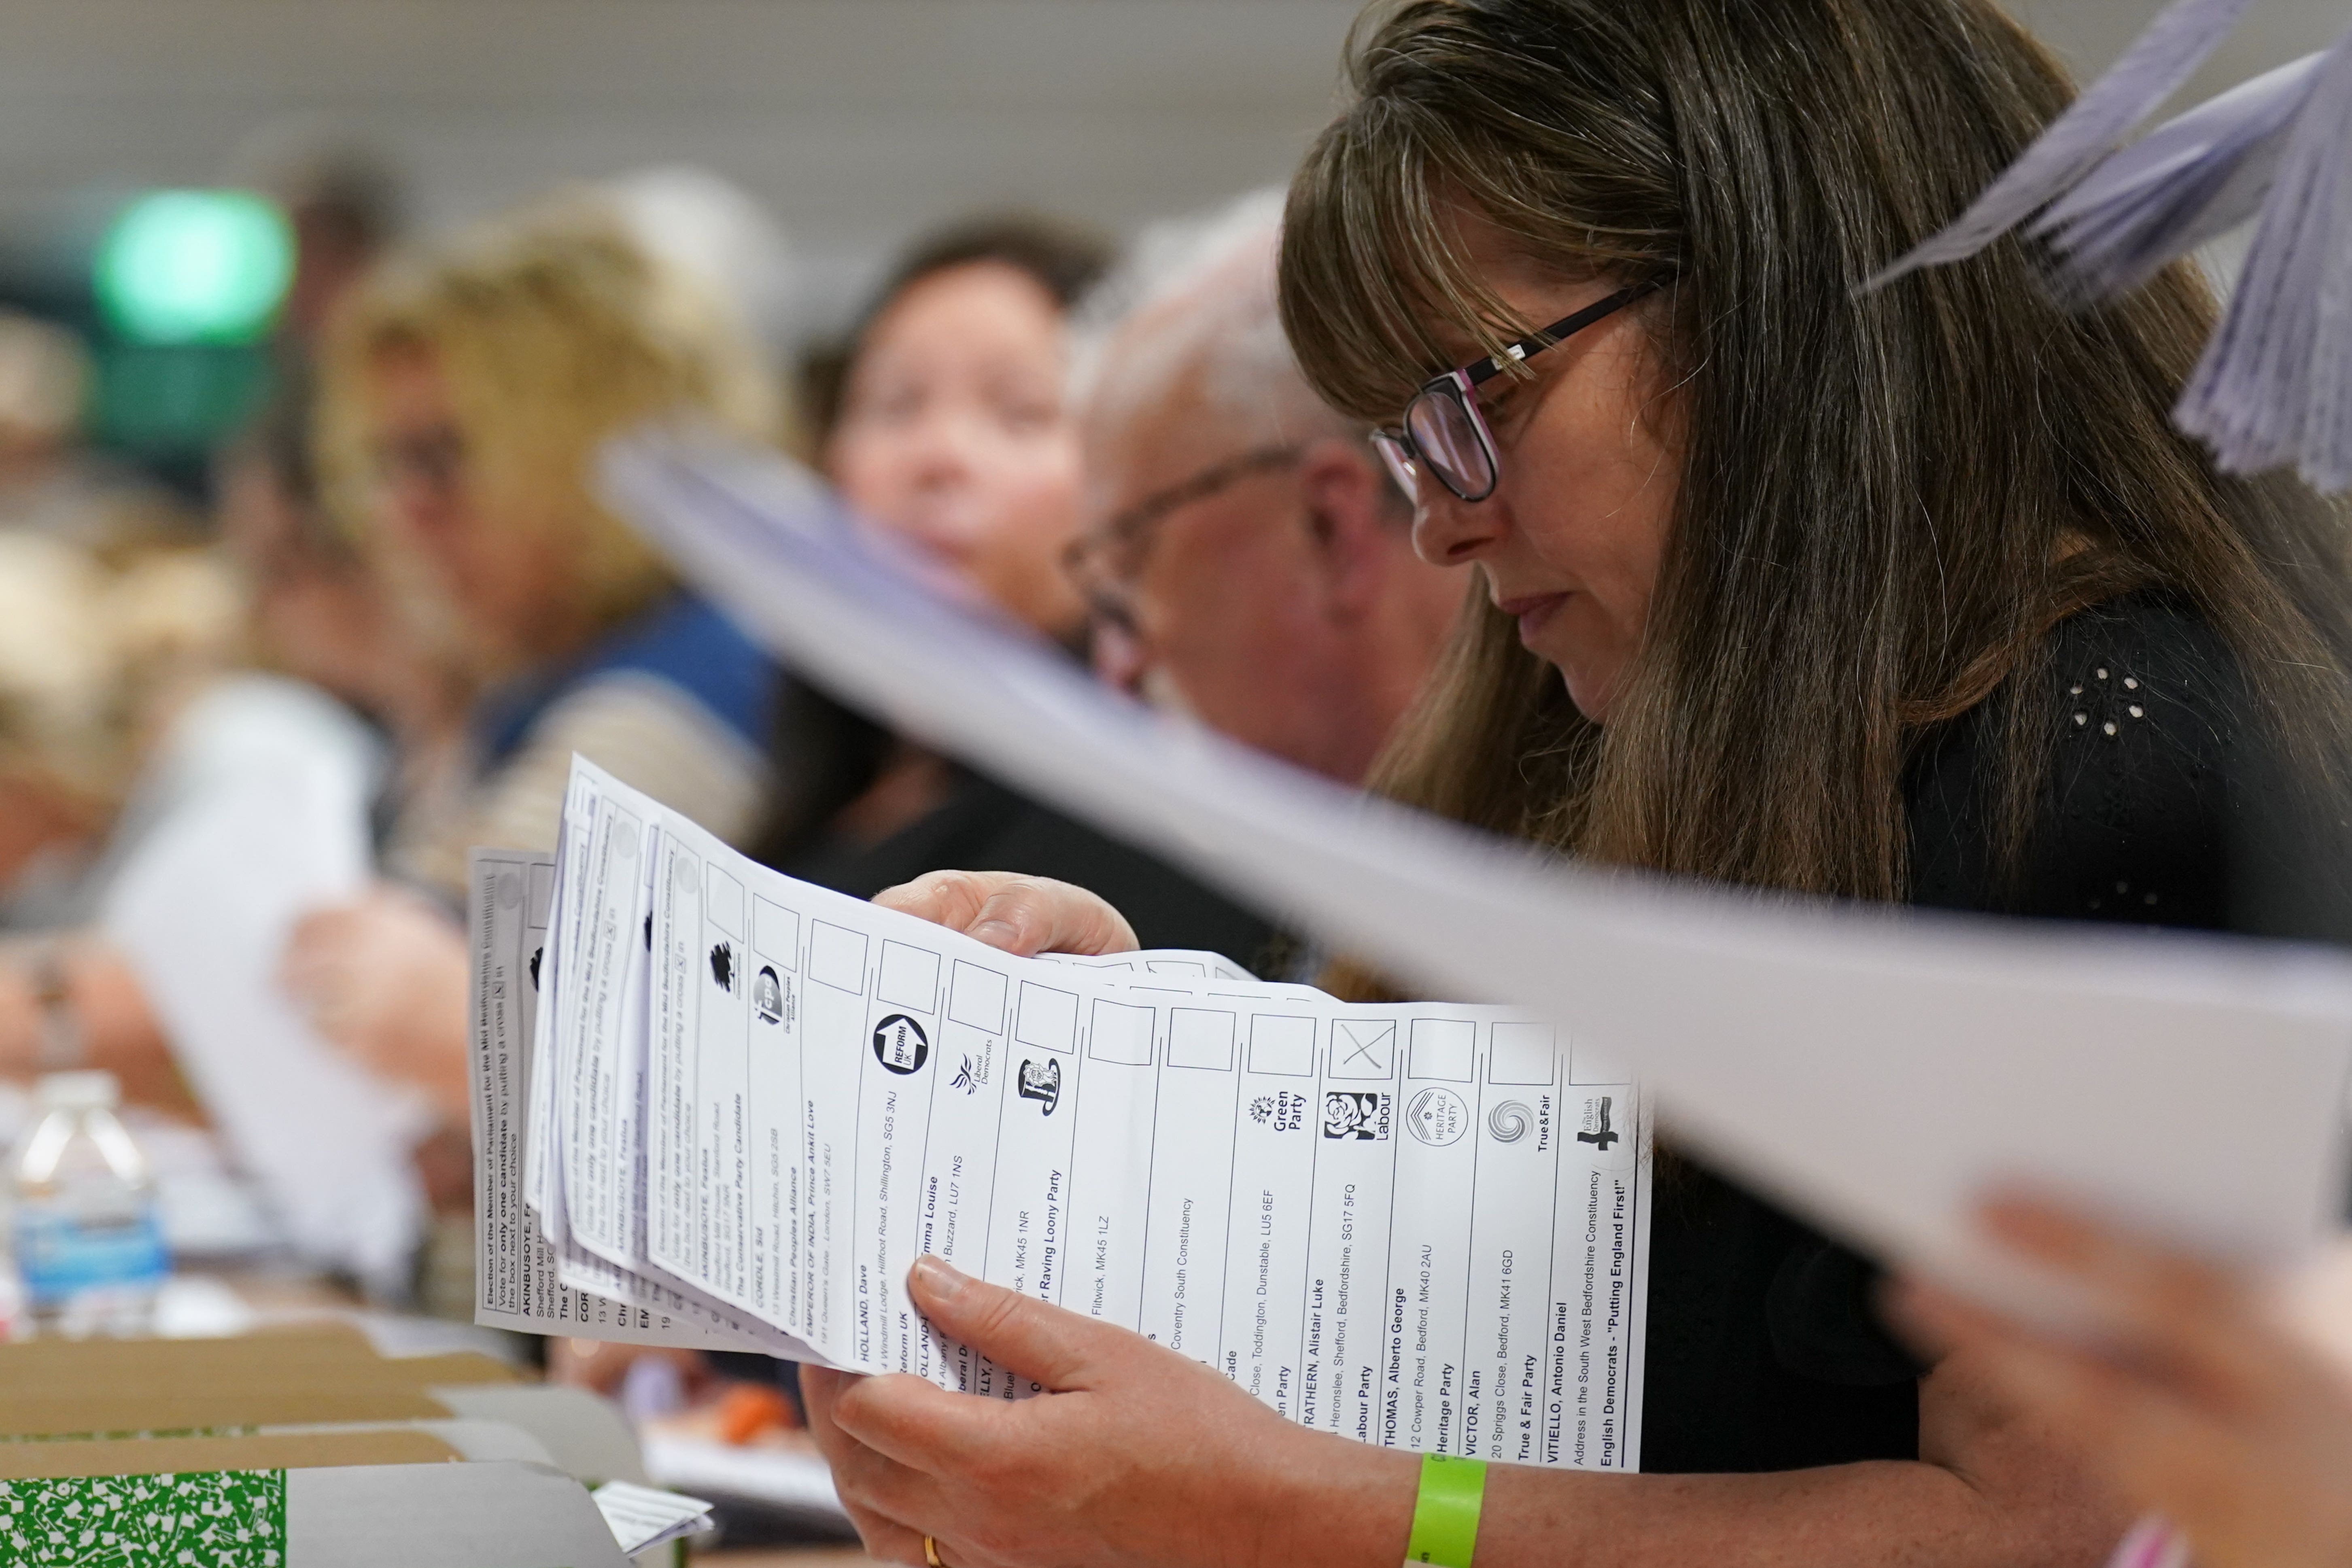 Votes are counted at Priory House in Chicksands, Bedfordshire during the count for the Mid Bedfordshire by-election (PA)